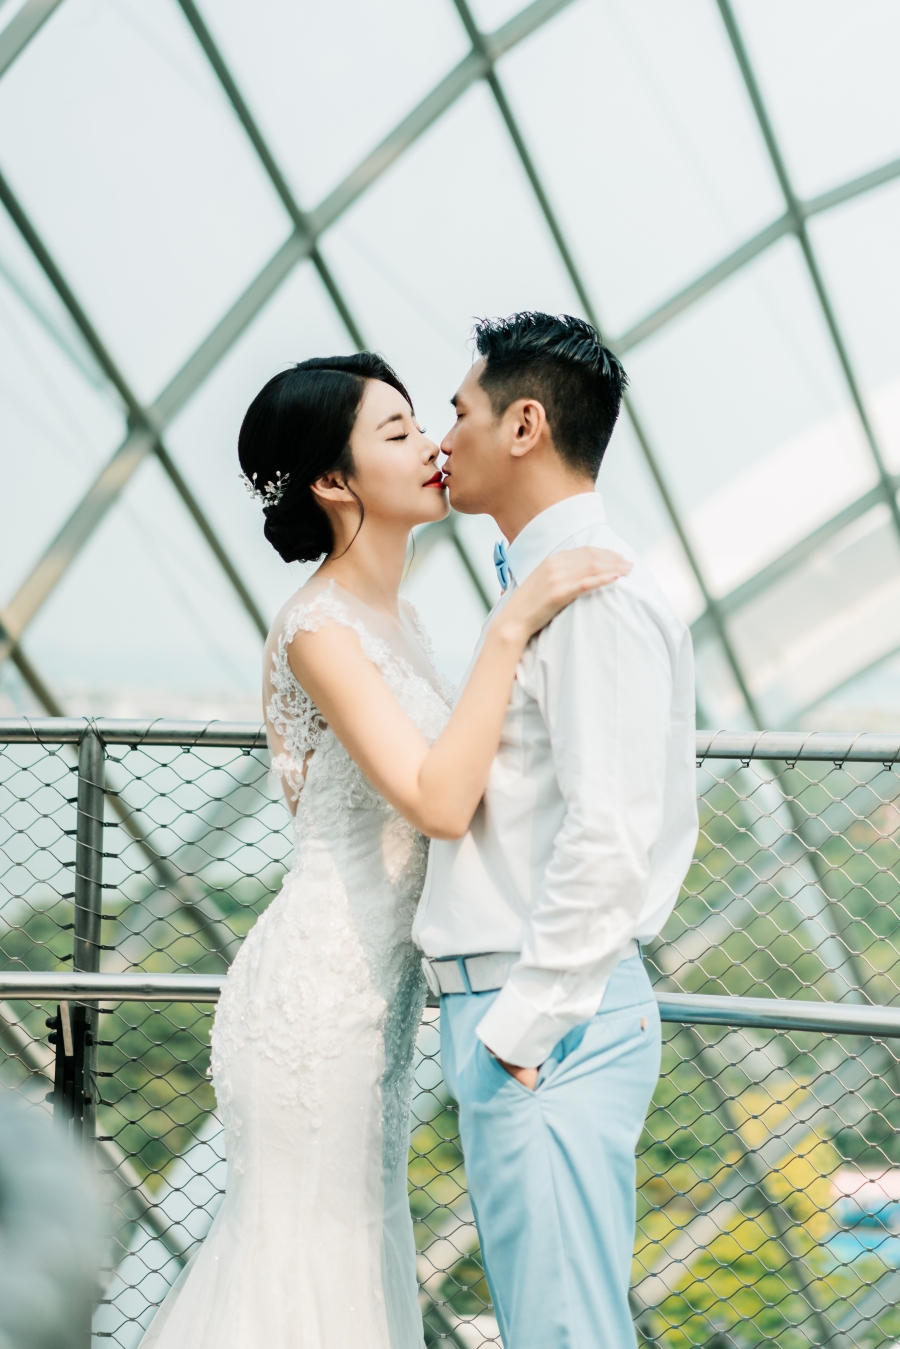 Singapore Pre-Wedding Photoshoot At Cloud Forest, Fort Canning Spiral Staircase And Marina Bay For Korean Couple  by Michael  on OneThreeOneFour 1